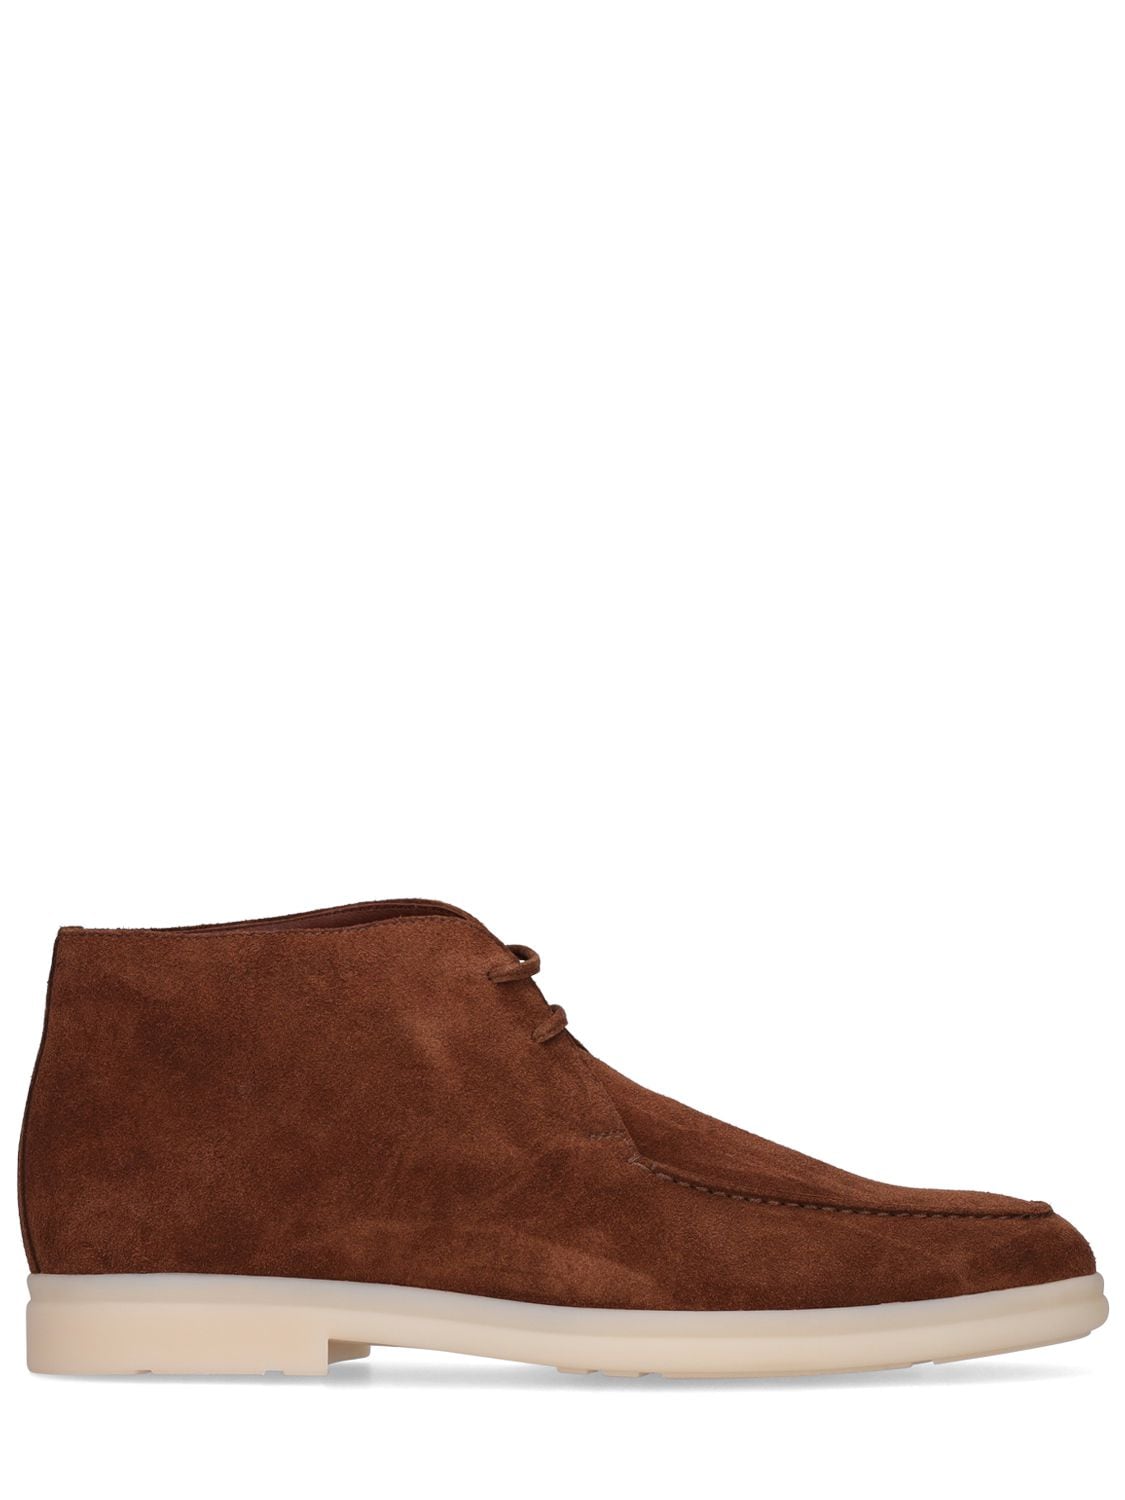 Goring Suede Lace Up Boots - CHURCH'S - Modalova